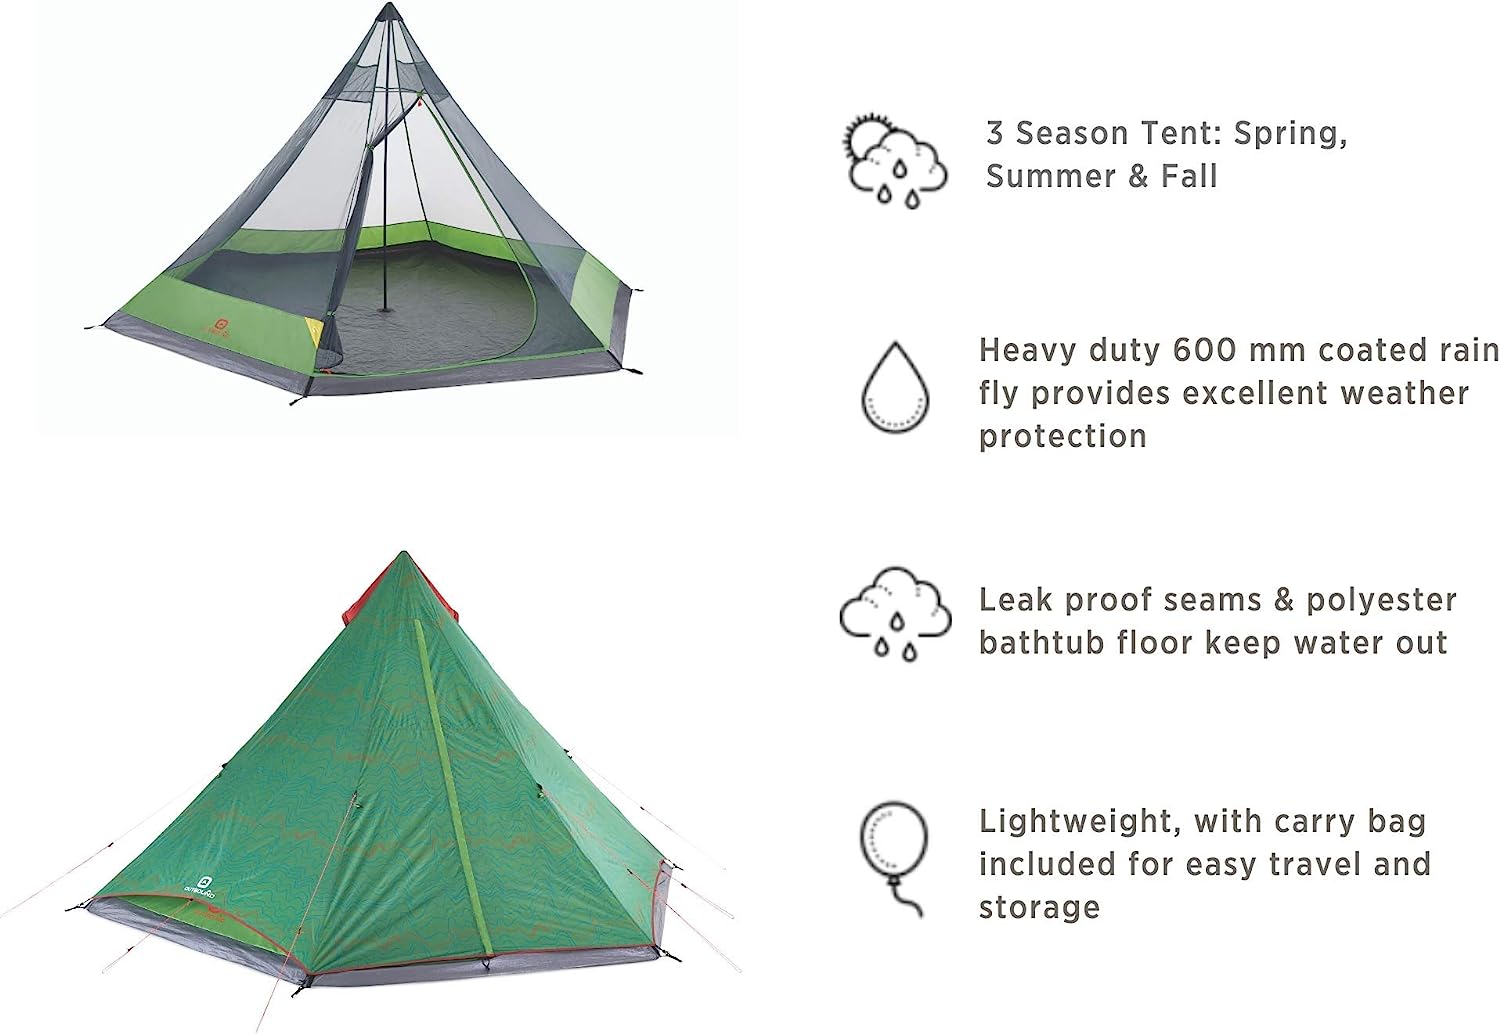 Outbound Pyramid Tent For 6 Person Features